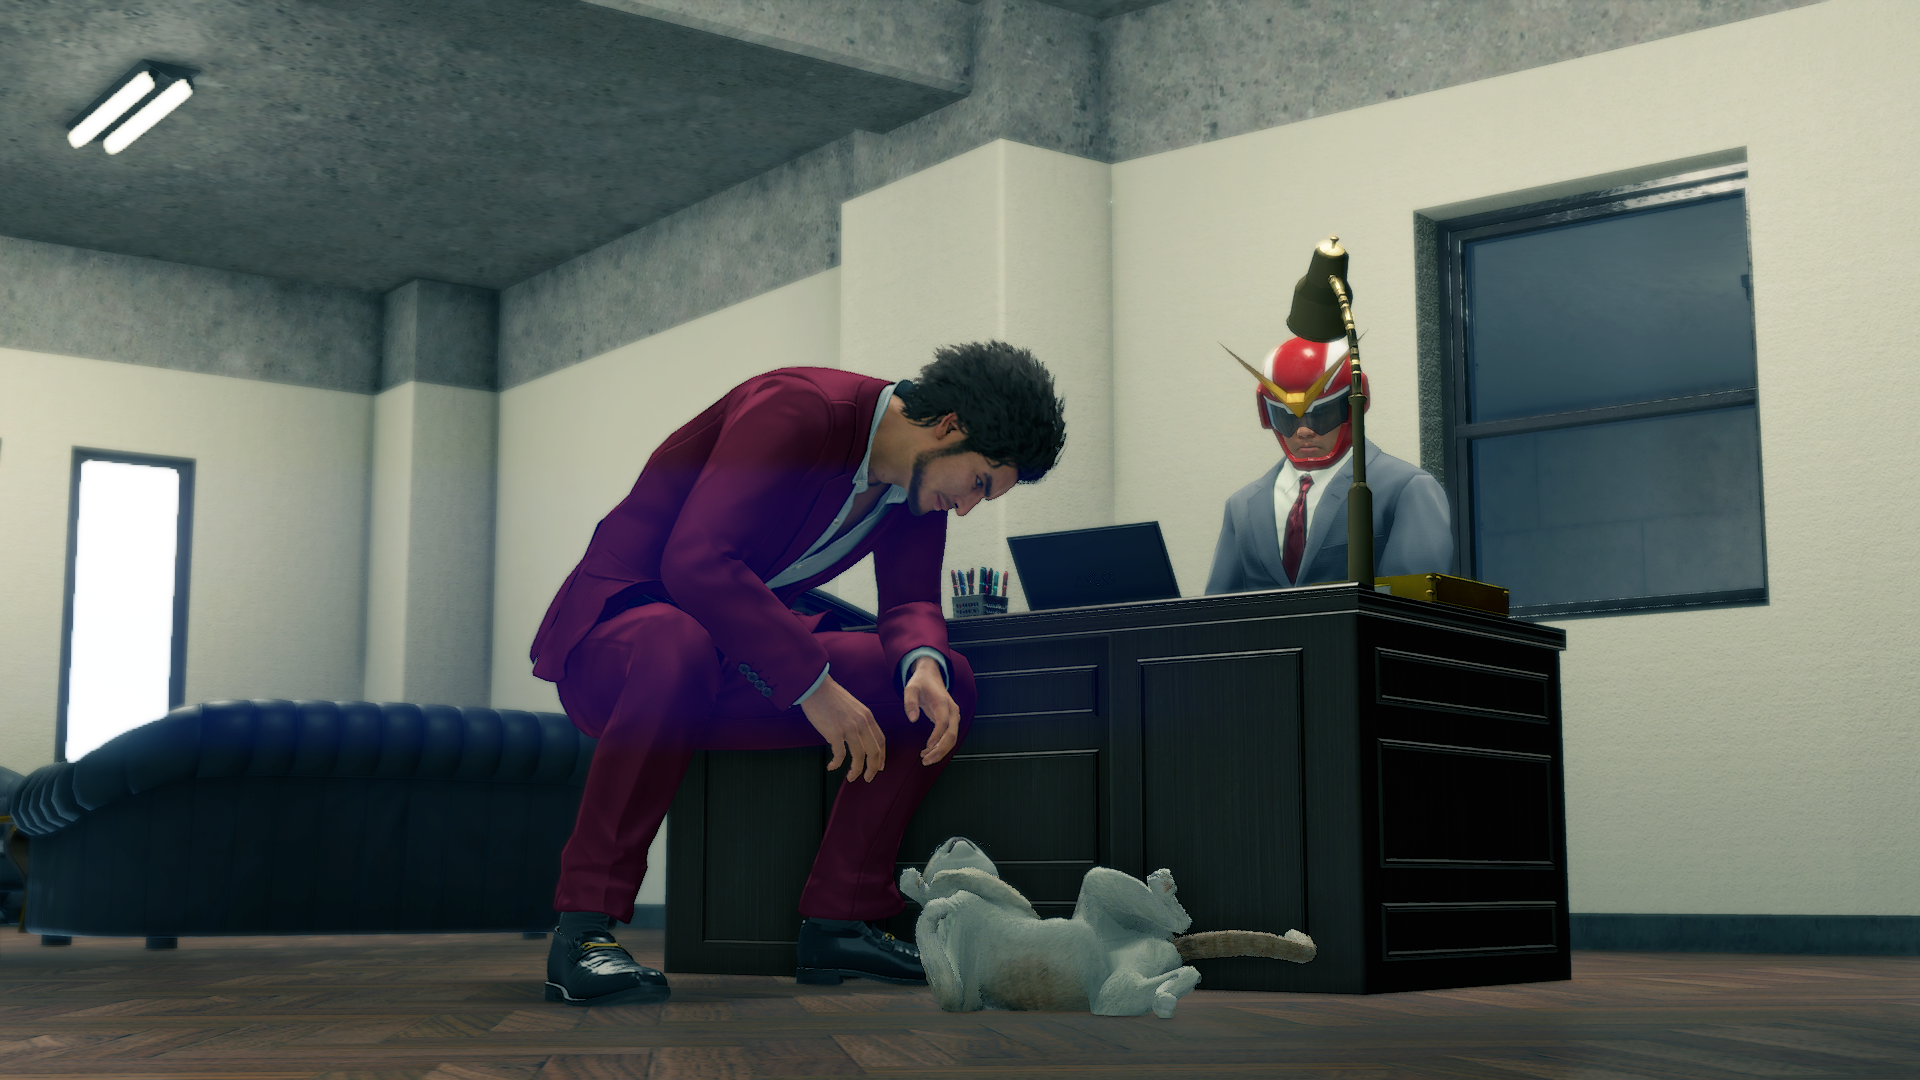 Screengrab of a cutscene from the game Yakuza: Like a Dragon, where Ichiban Kasuga, the game's protagonist, is seen squatting to look at a cat that is on its back and is showing its belly to him. In the background you can also see Part-Time Hero, who is the owner of the cat, behind an office desk.